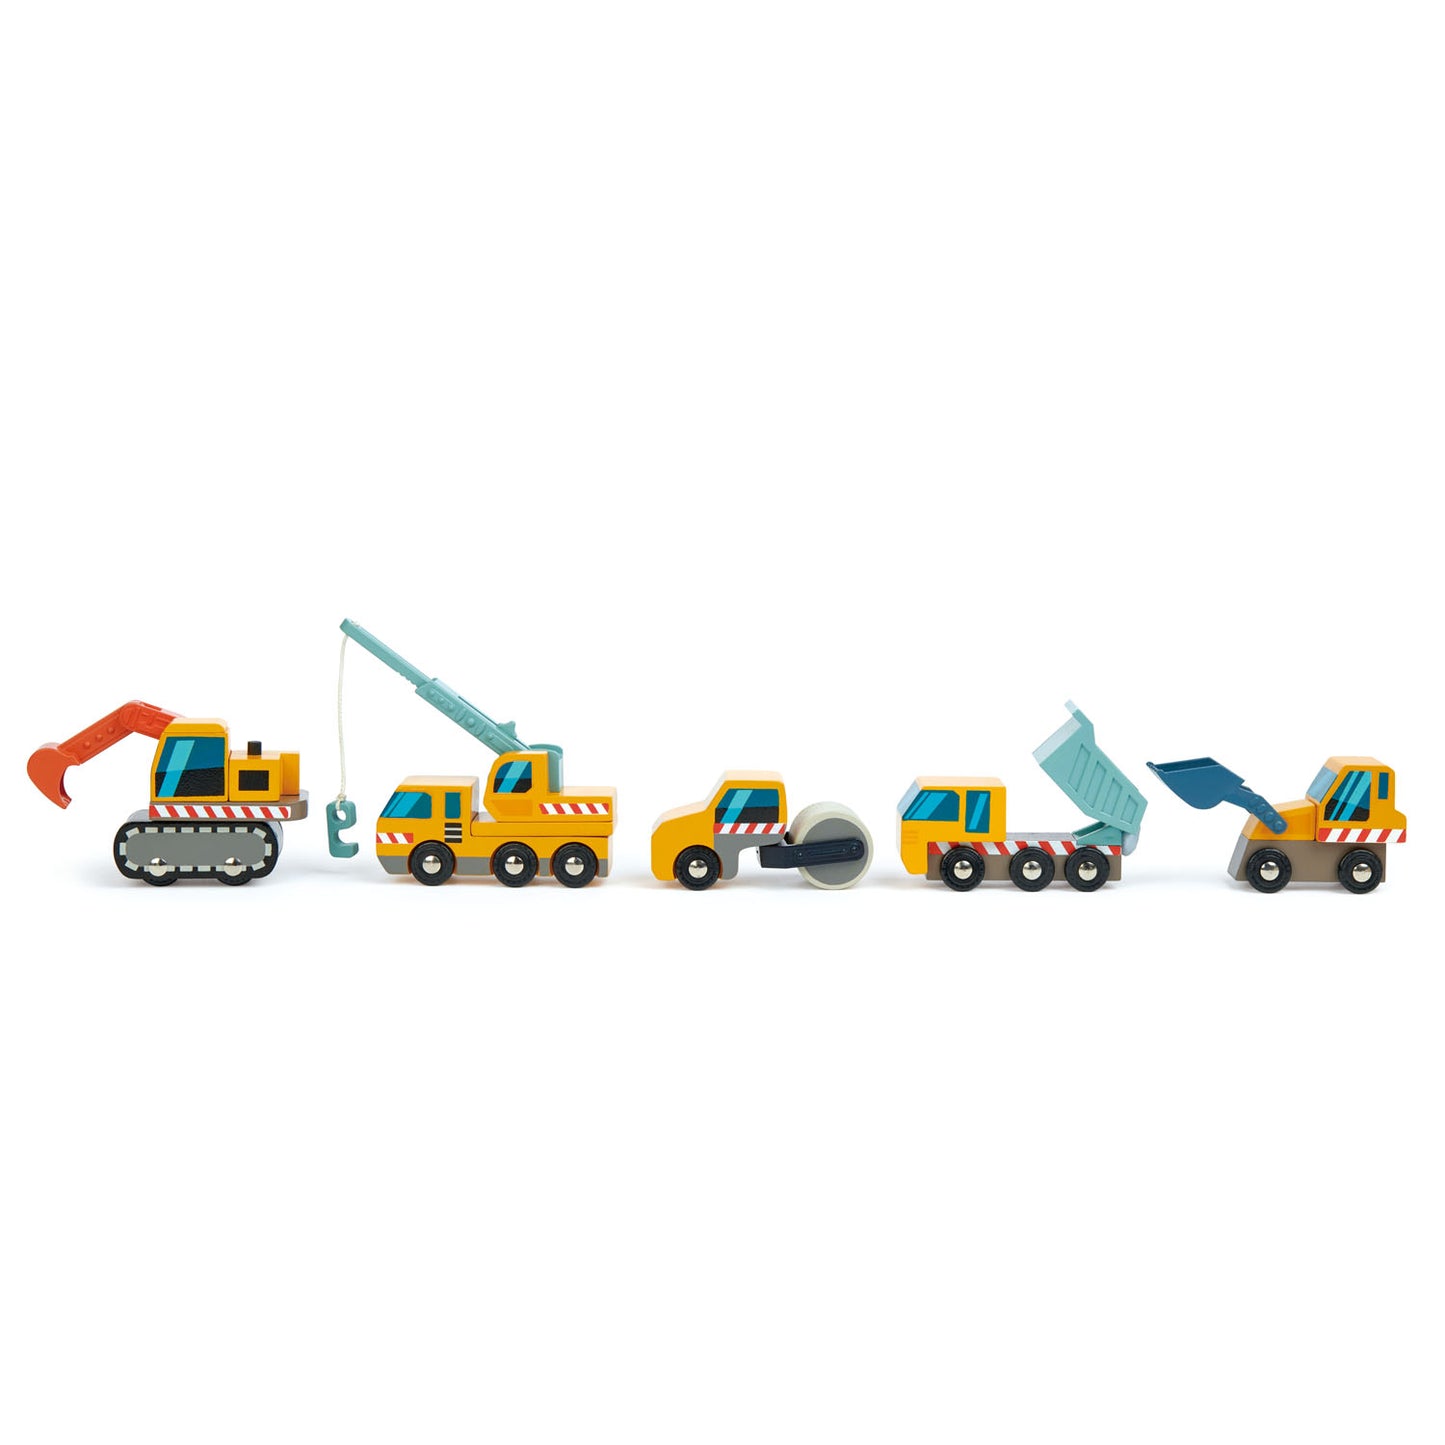 Set of five wooden toy construction vehicles in a row.  Set includes a dump truck, front loader, excavation digger, crane truck and road roller.